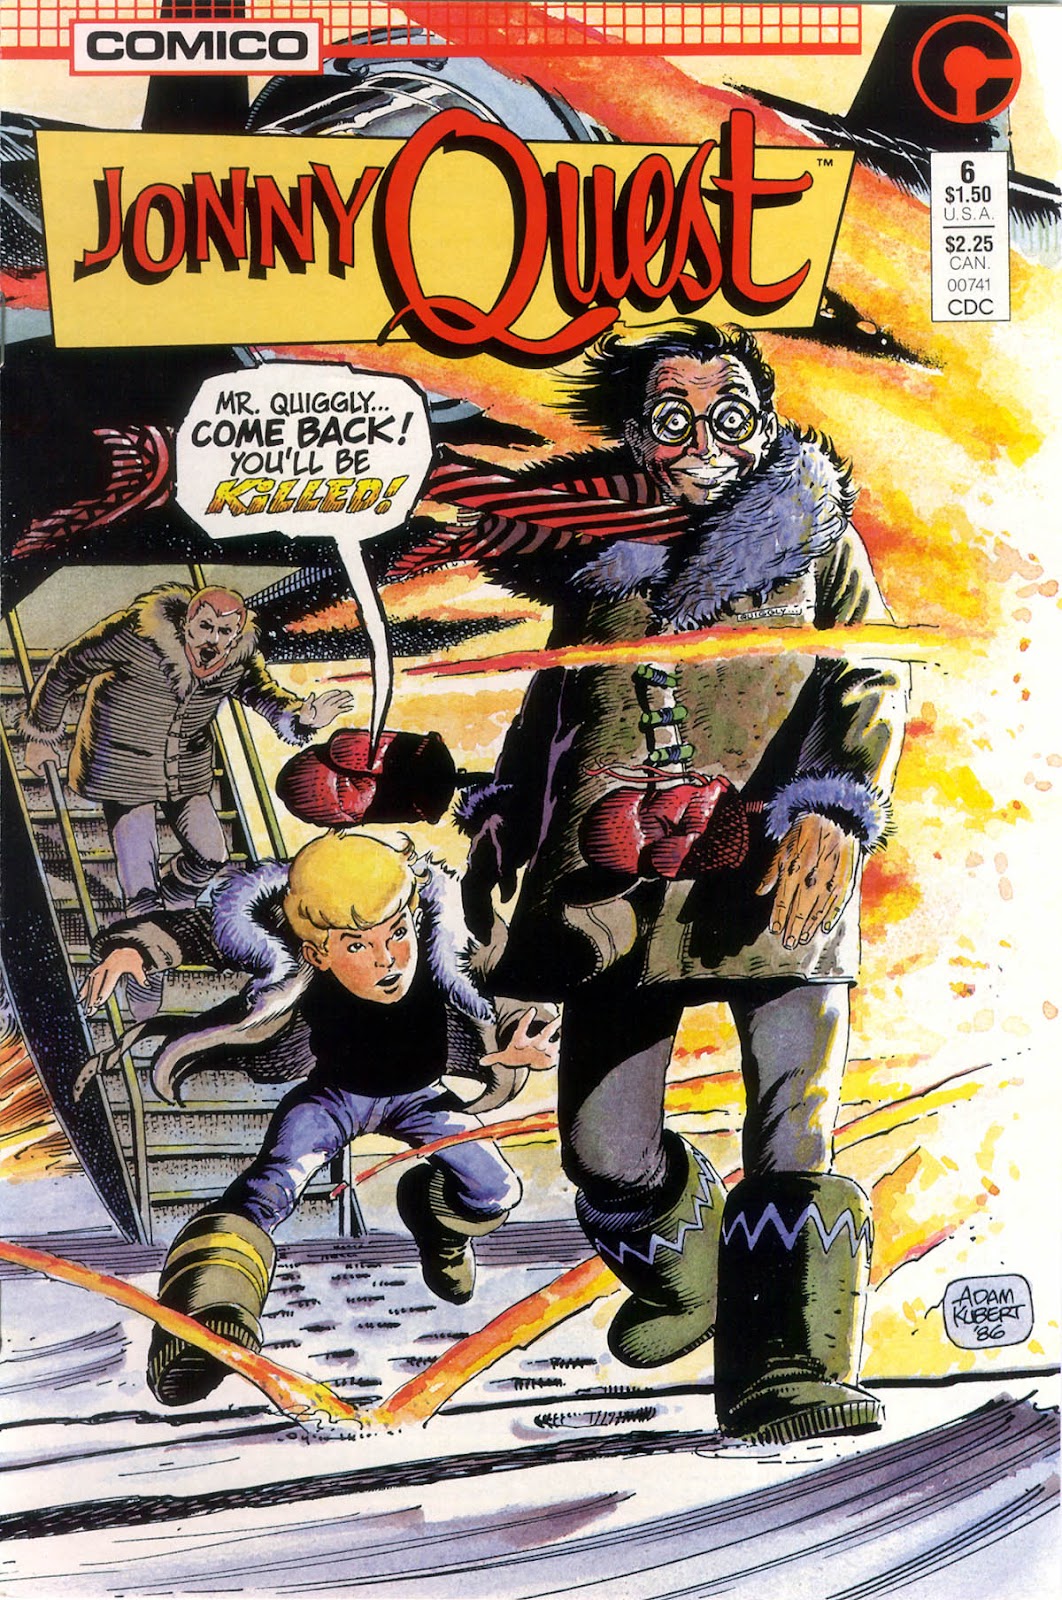 Jonny Quest Porn - Jonny Quest 06 | Read Jonny Quest 06 comic online in high quality. Read  Full Comic online for free - Read comics online in high quality  .|viewcomiconline.com